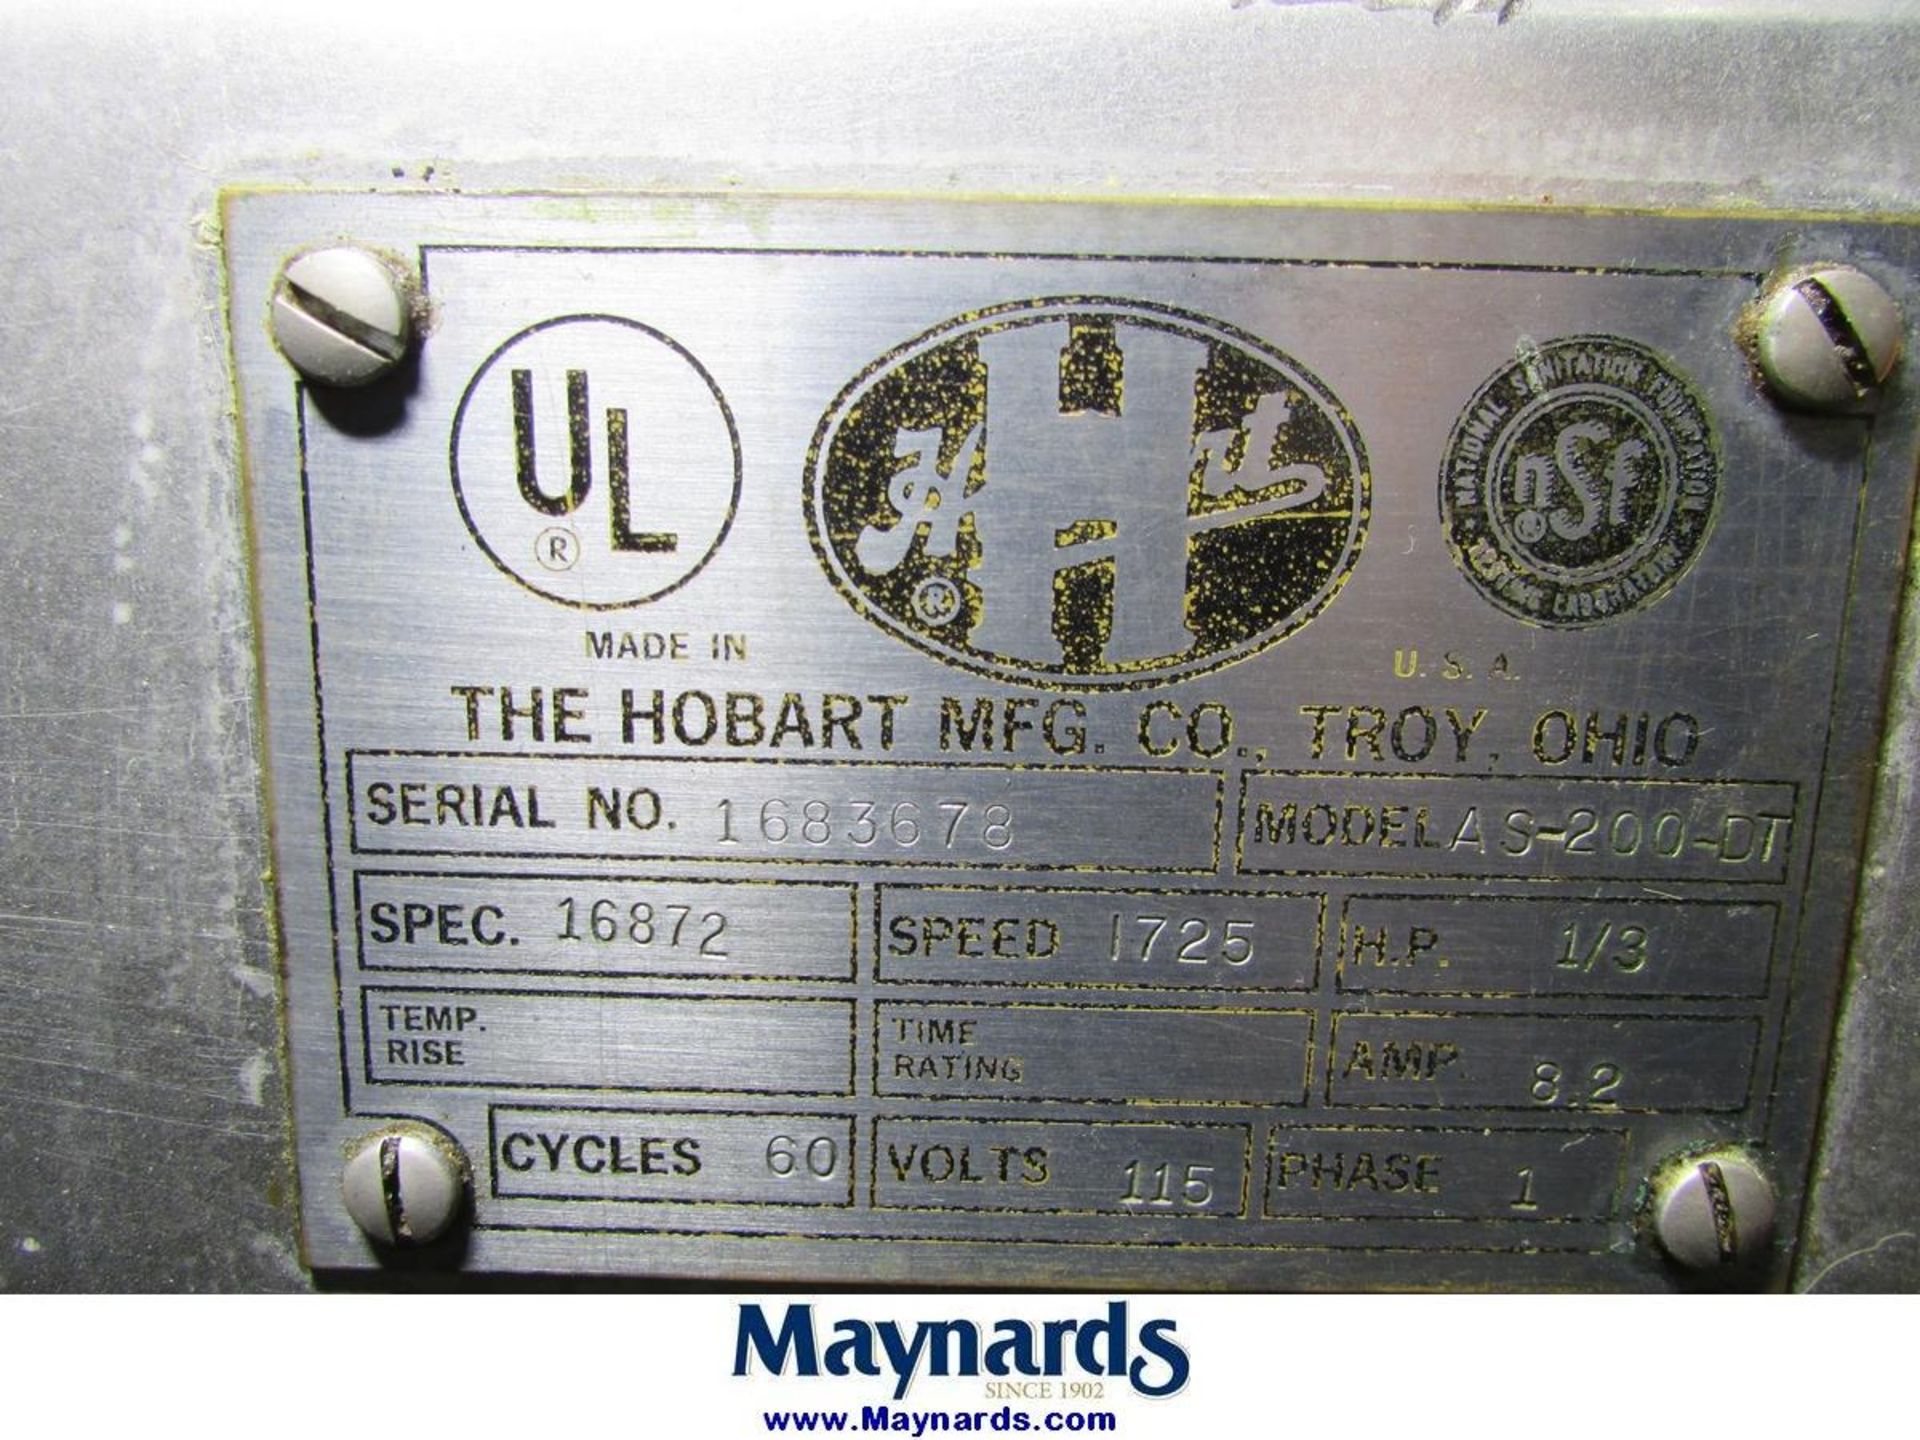 Hobart AS-200-DT Stainless Steel Commercial Mixer - Image 4 of 4